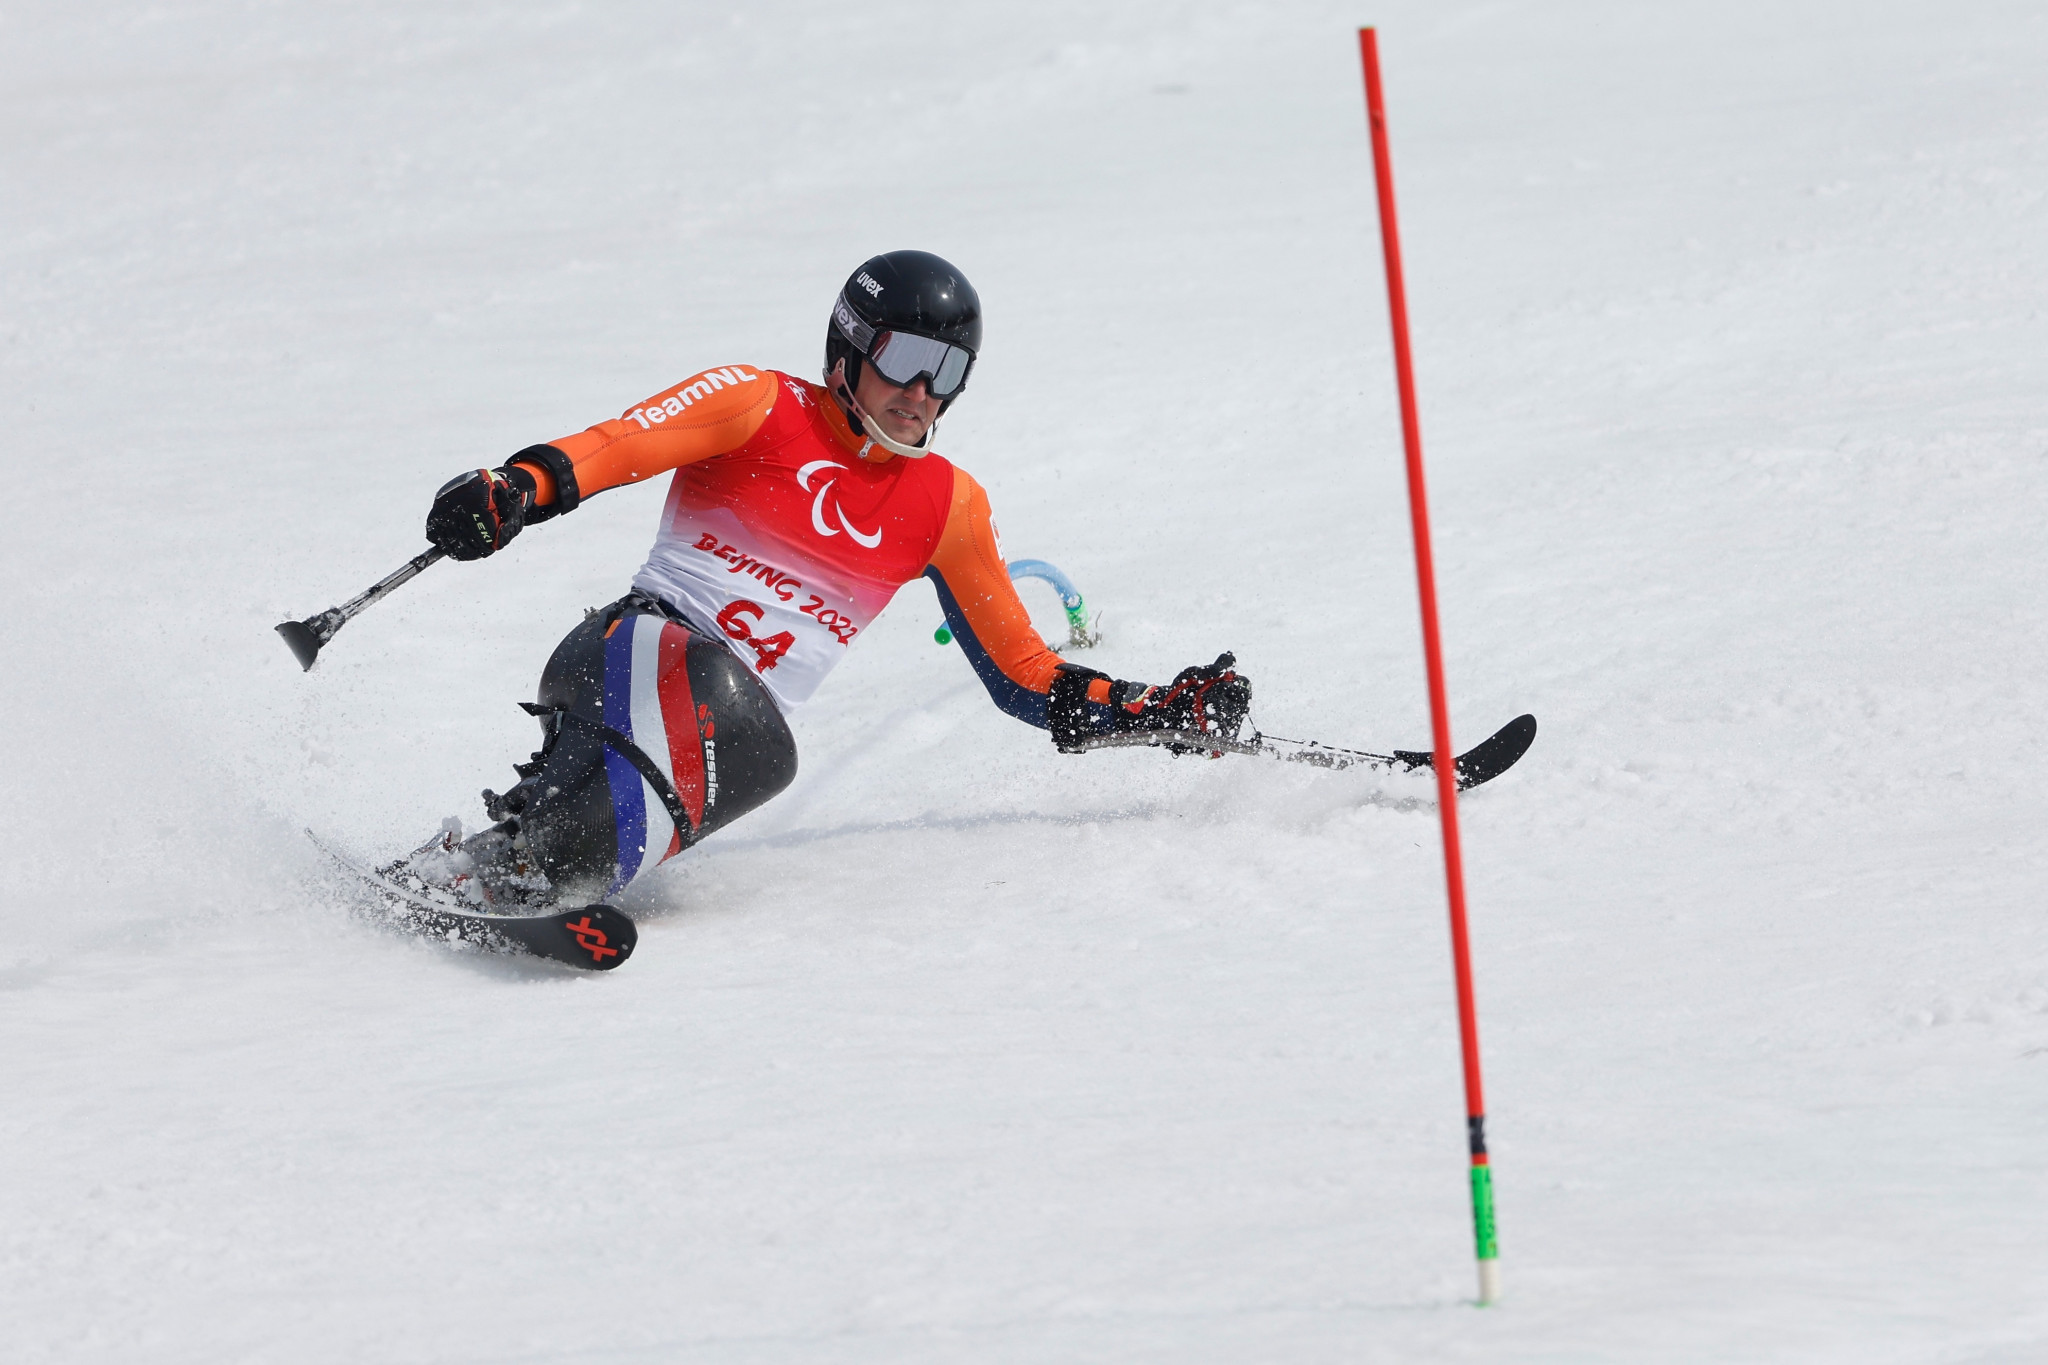 Exclusive: European Paralympic Committee considering creating winter multi-sport events